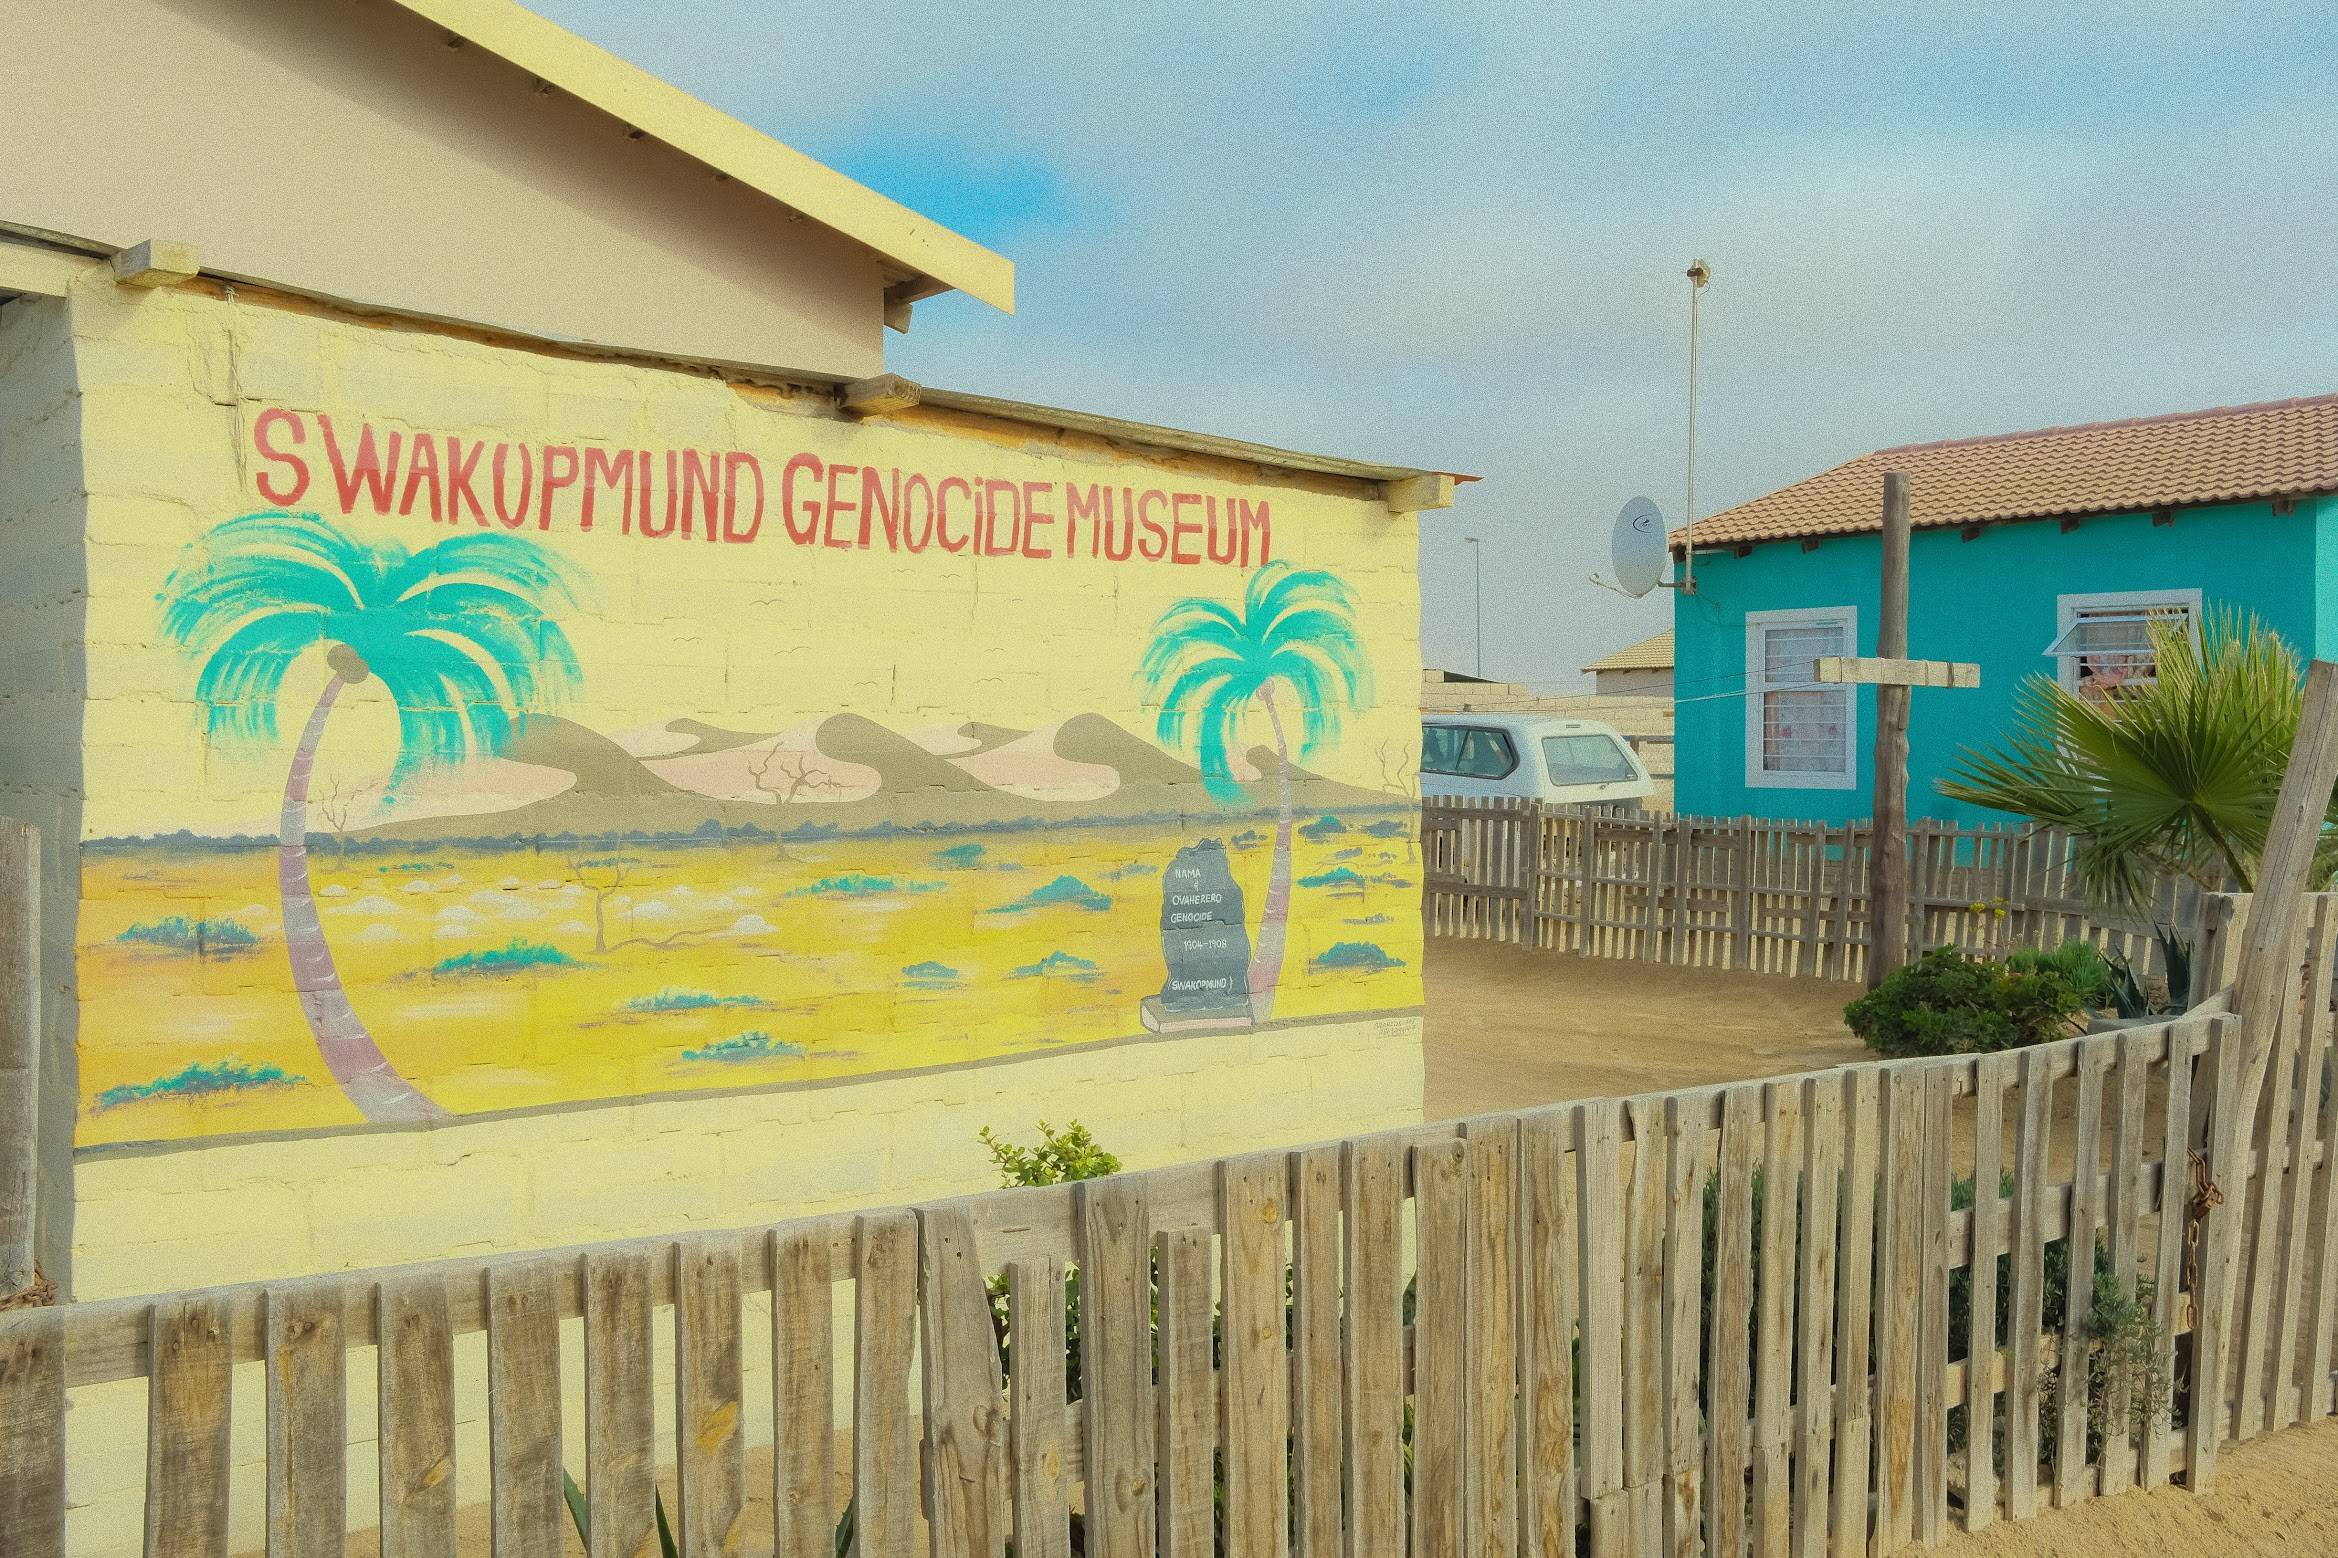 Outside of the Swakopmund Genocide Museum in Namibia. 